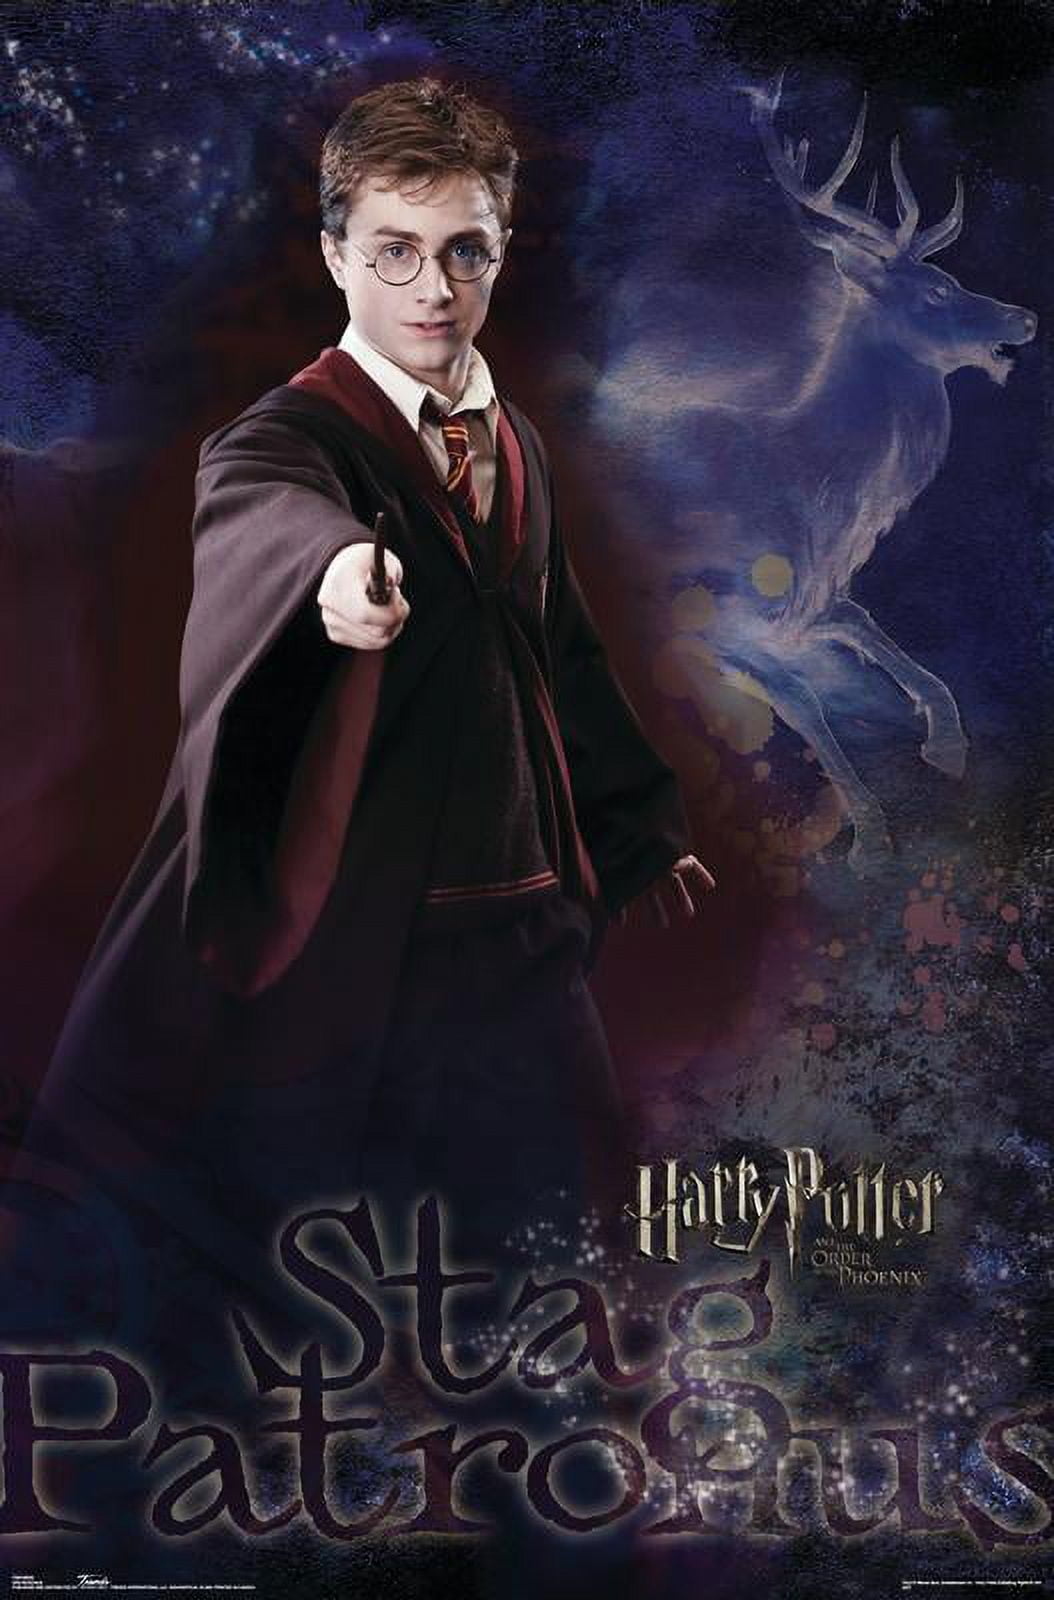 Trends International Harry Potter 6 Trio Wall Poster 22.375 x 34